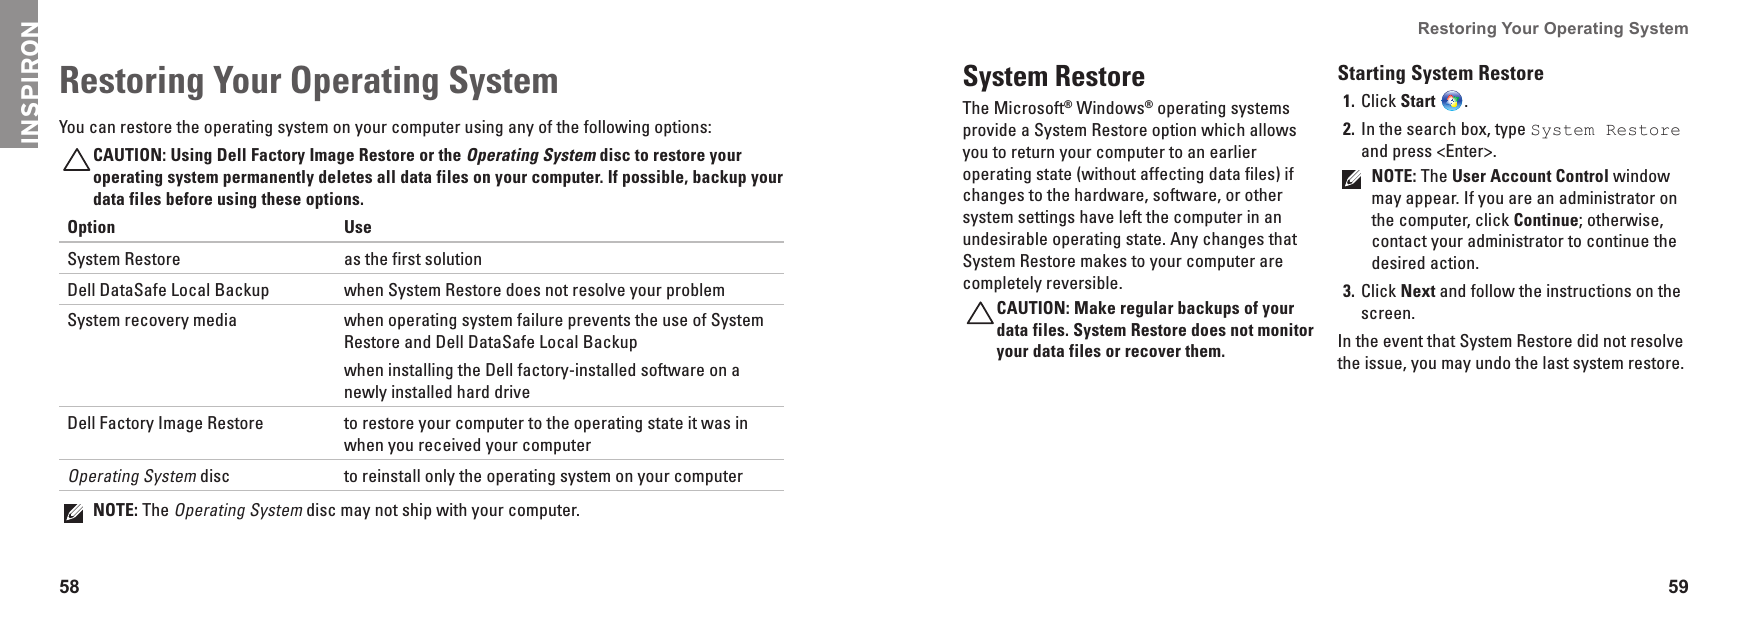 58 59Restoring Your Operating System  You can restore the operating system on your computer using any of the following options:CAUTION: Using Dell Factory Image Restore or the Operating System disc to restore your operating system permanently deletes all data files on your computer. If possible, backup your data files before using these options.Option UseSystem Restore as the first solutionDell DataSafe Local Backup when System Restore does not resolve your problemSystem recovery media when operating system failure prevents the use of System Restore and Dell DataSafe Local Backupwhen installing the Dell factory-installed software on a newly installed hard driveDell Factory Image Restore to restore your computer to the operating state it was in when you received your computerOperating System disc to reinstall only the operating system on your computerNOTE: The Operating System disc may not ship with your computer.Restoring Your Operating System  System RestoreThe Microsoft® Windows® operating systems provide a System Restore option which allows you to return your computer to an earlier operating state (without affecting data files) if changes to the hardware, software, or other system settings have left the computer in an undesirable operating state. Any changes that System Restore makes to your computer are completely reversible.CAUTION: Make regular backups of your data files. System Restore does not monitor your data files or recover them.Starting System RestoreClick 1.  Start  .In the search box, type 2.  System Restore and press &lt;Enter&gt;.NOTE: The User Account Control window may appear. If you are an administrator on the computer, click Continue; otherwise, contact your administrator to continue the desired action.Click 3.  Next and follow the instructions on the screen.In the event that System Restore did not resolve the issue, you may undo the last system restore.INSPIRON